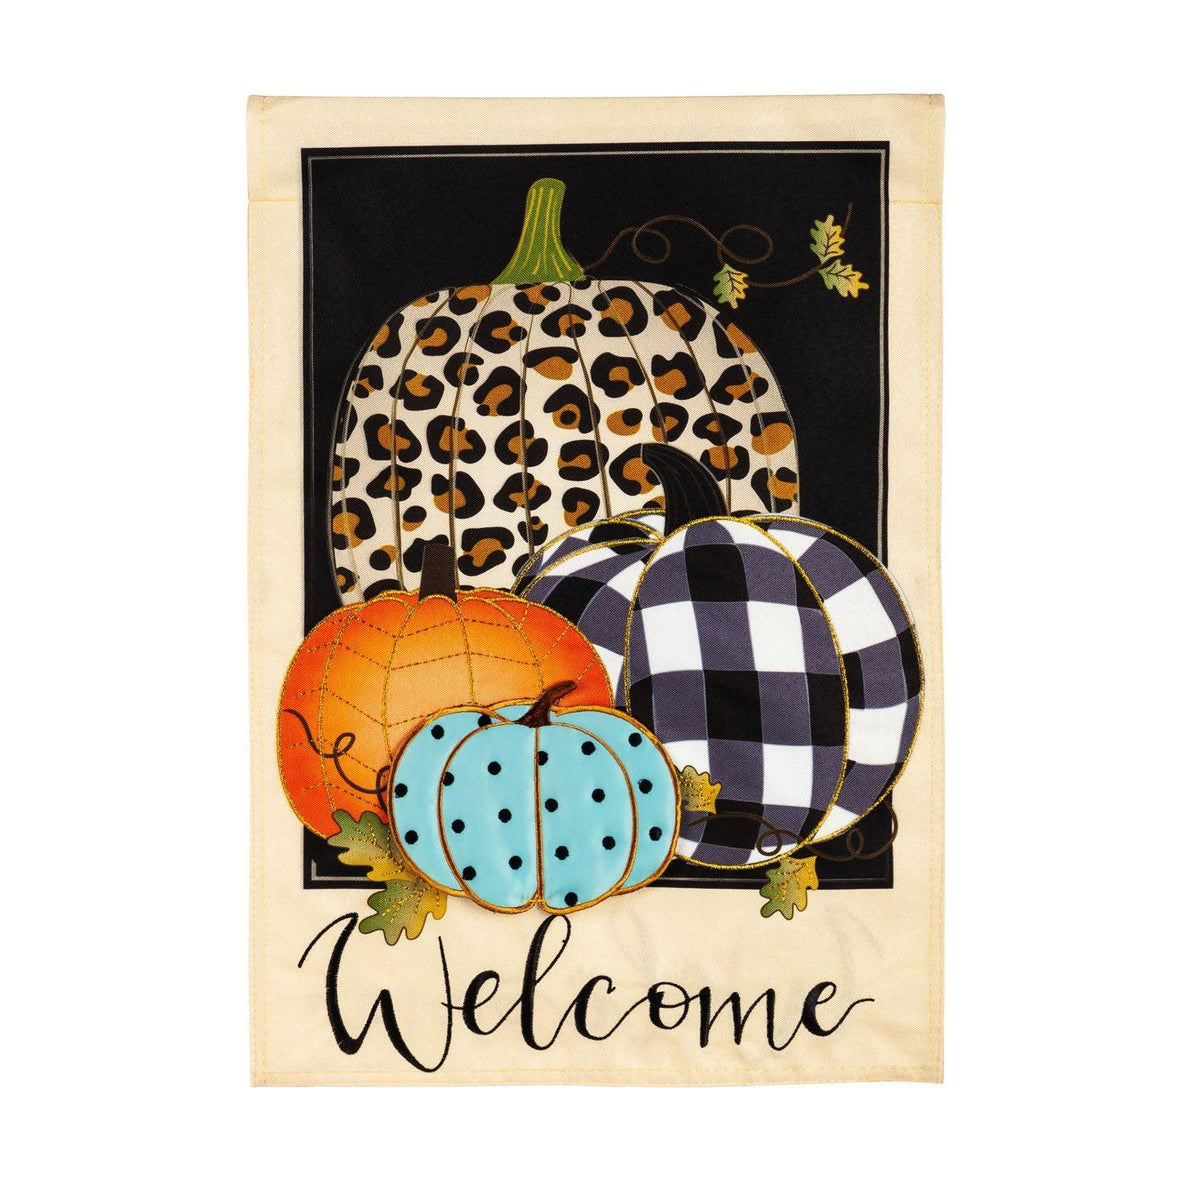 The Mixed Print Pumpkins garden flag features pumpkins in a variety of colors and patterns as well as the word "Welcome".